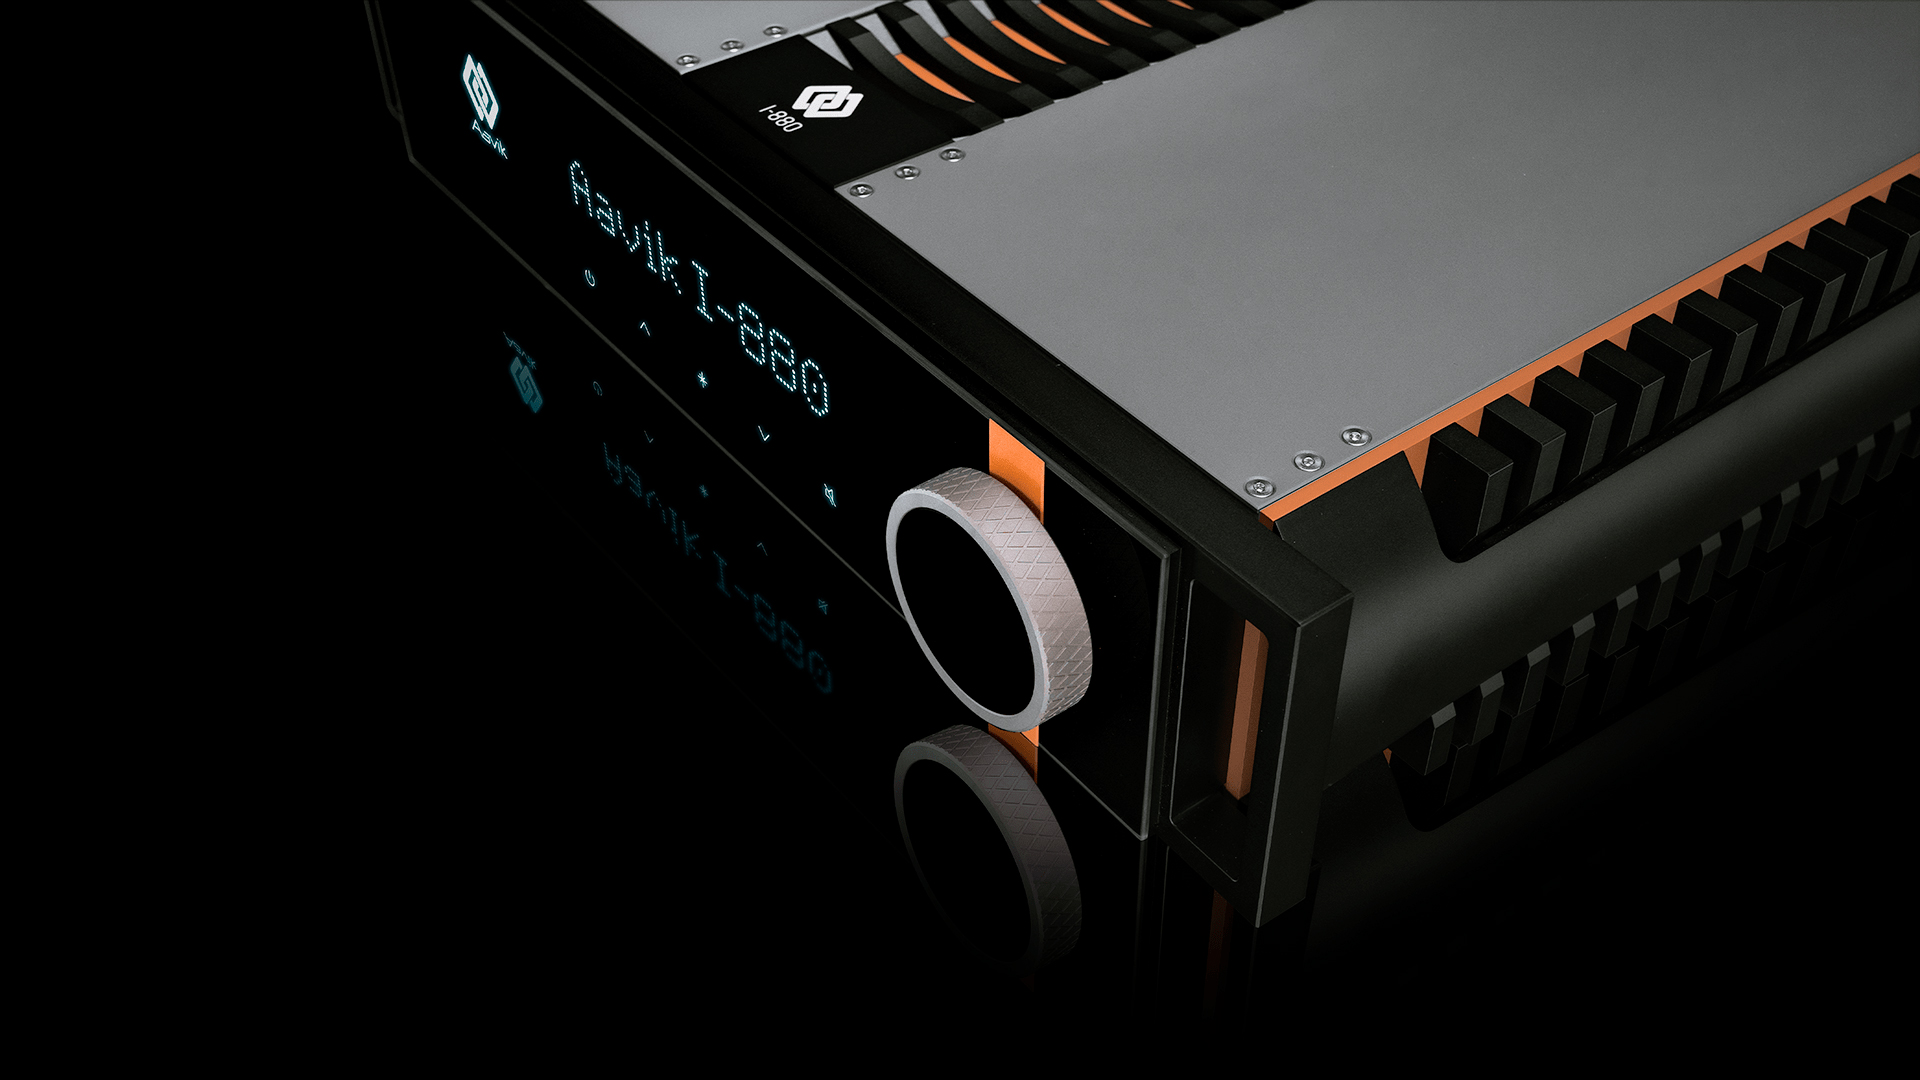 The new high end flagship I-880 integrated amplifier from Aavik (Image Credit: Aavik)